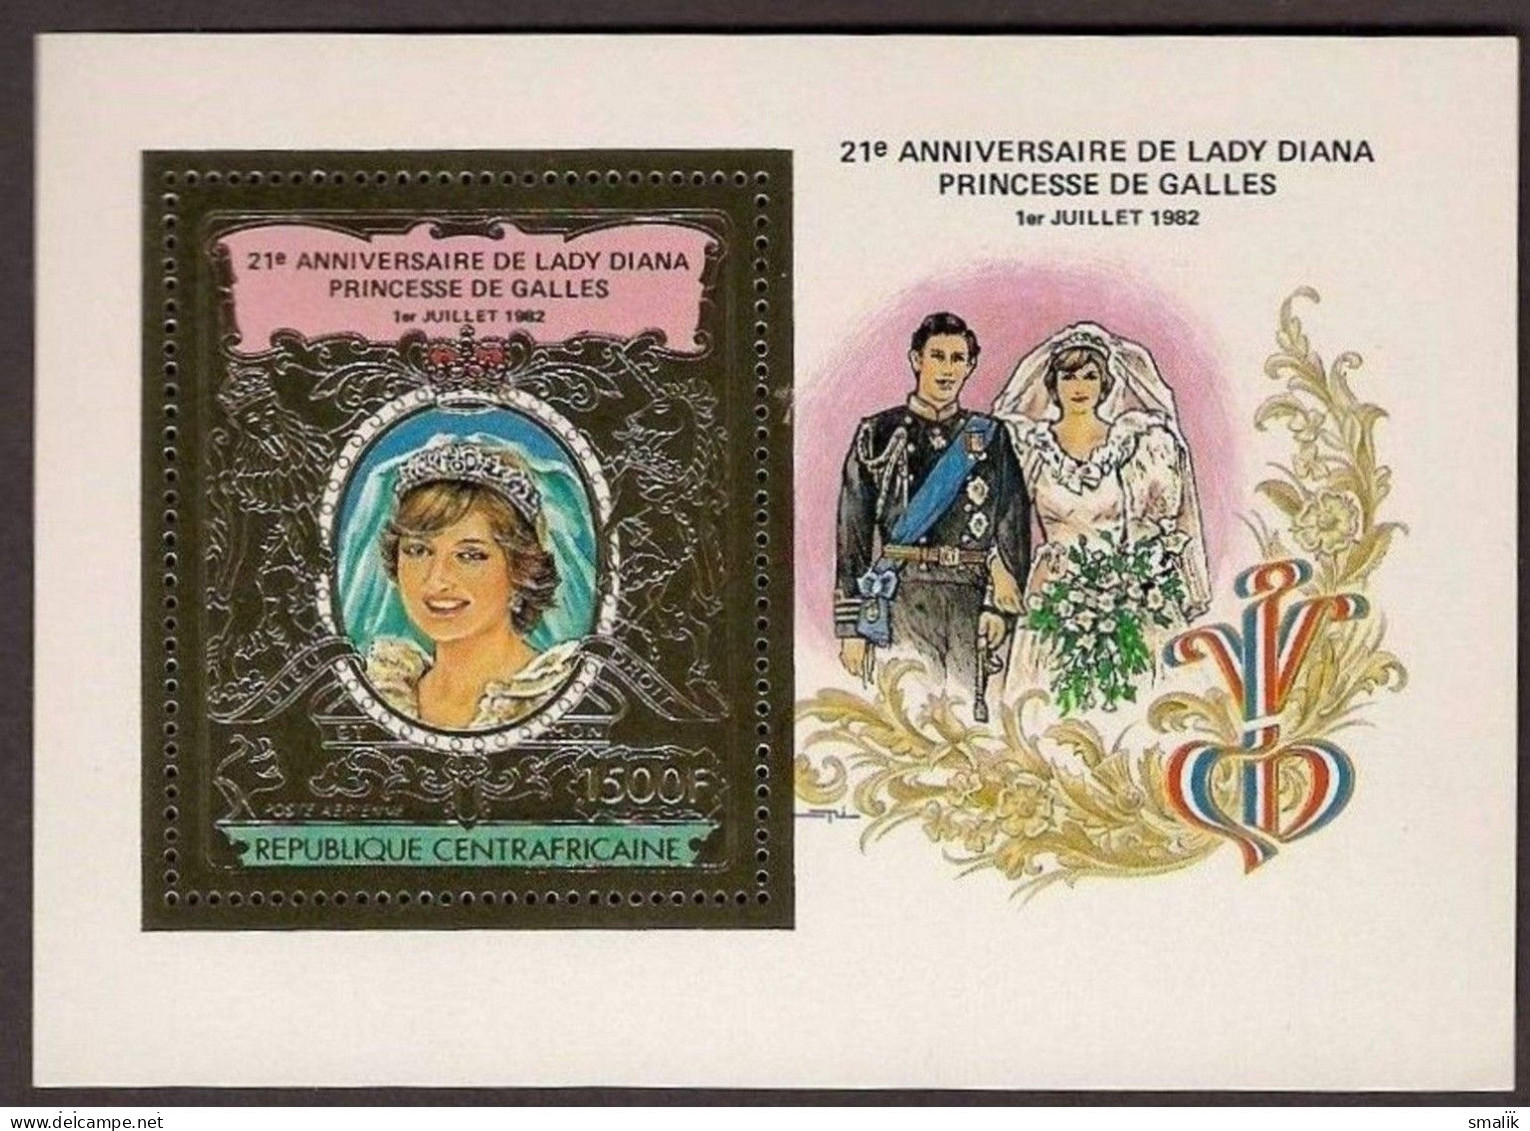 CENTRAL AFRICAN REPUBLIC 1982 - 21st Birthday Of Royal Princess Diana, Gold Foil Embossed DELUXE Miniature Sheet MNH - Repubblica Centroafricana